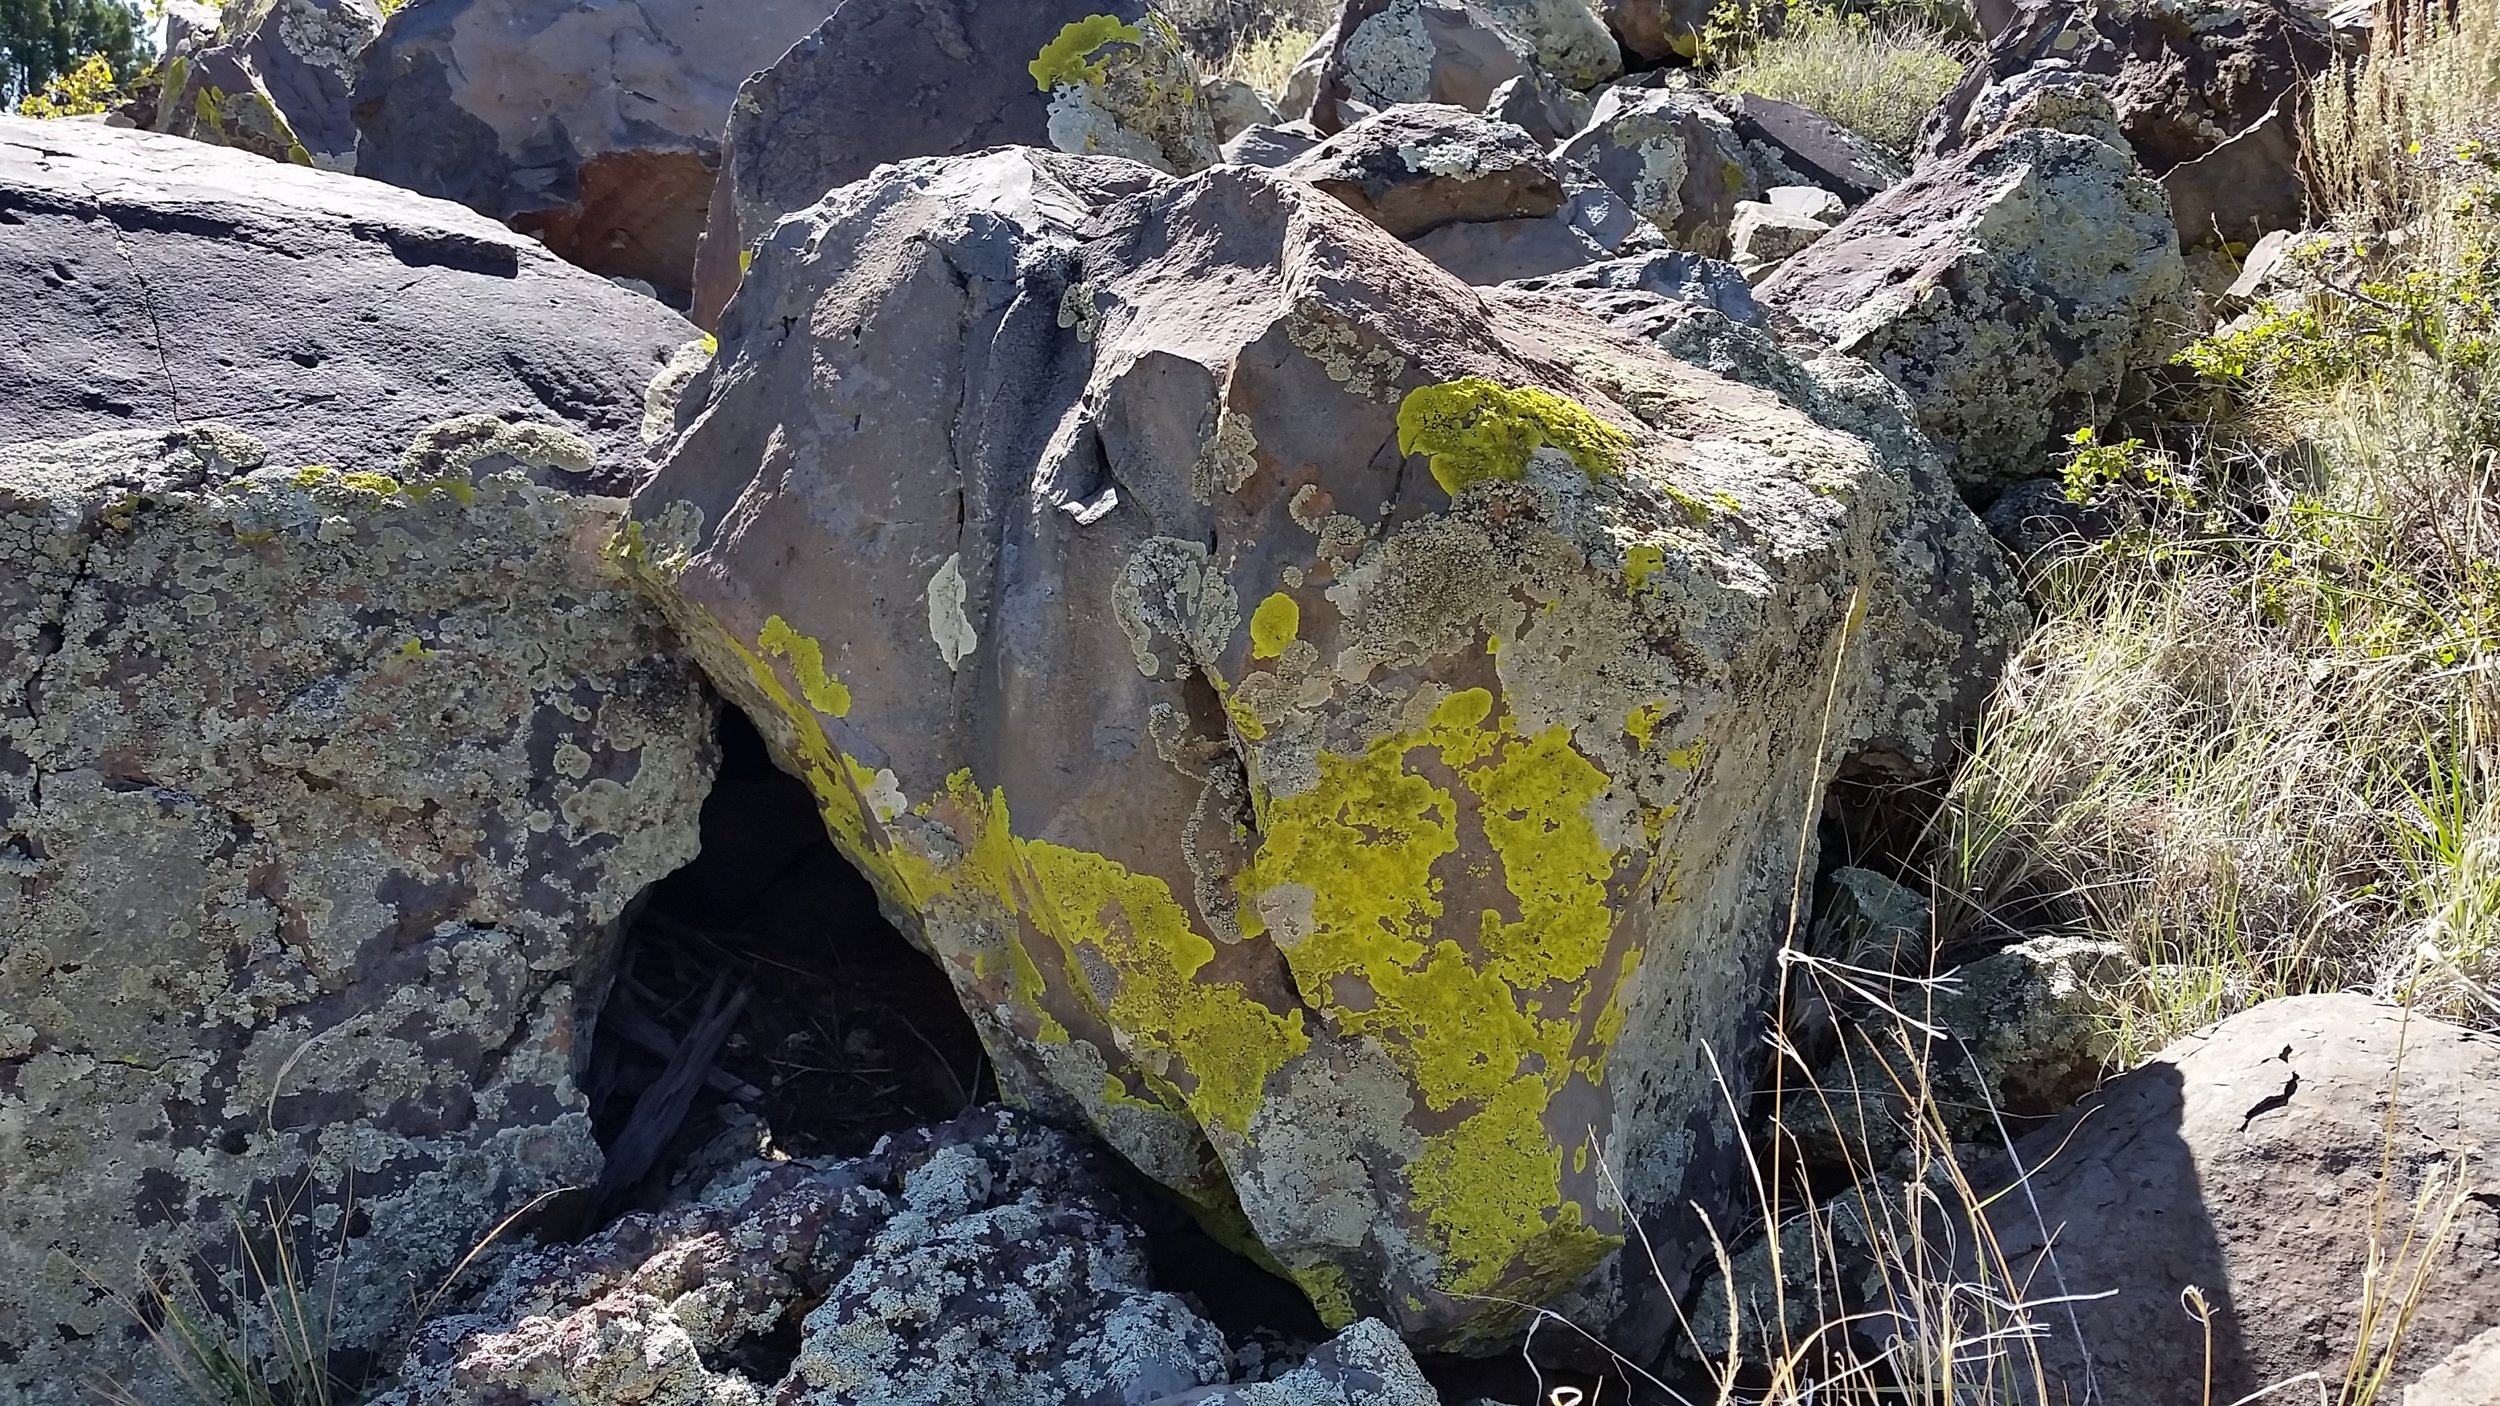  The basalt and lava boulders were covered in sage and acid green lichen. 